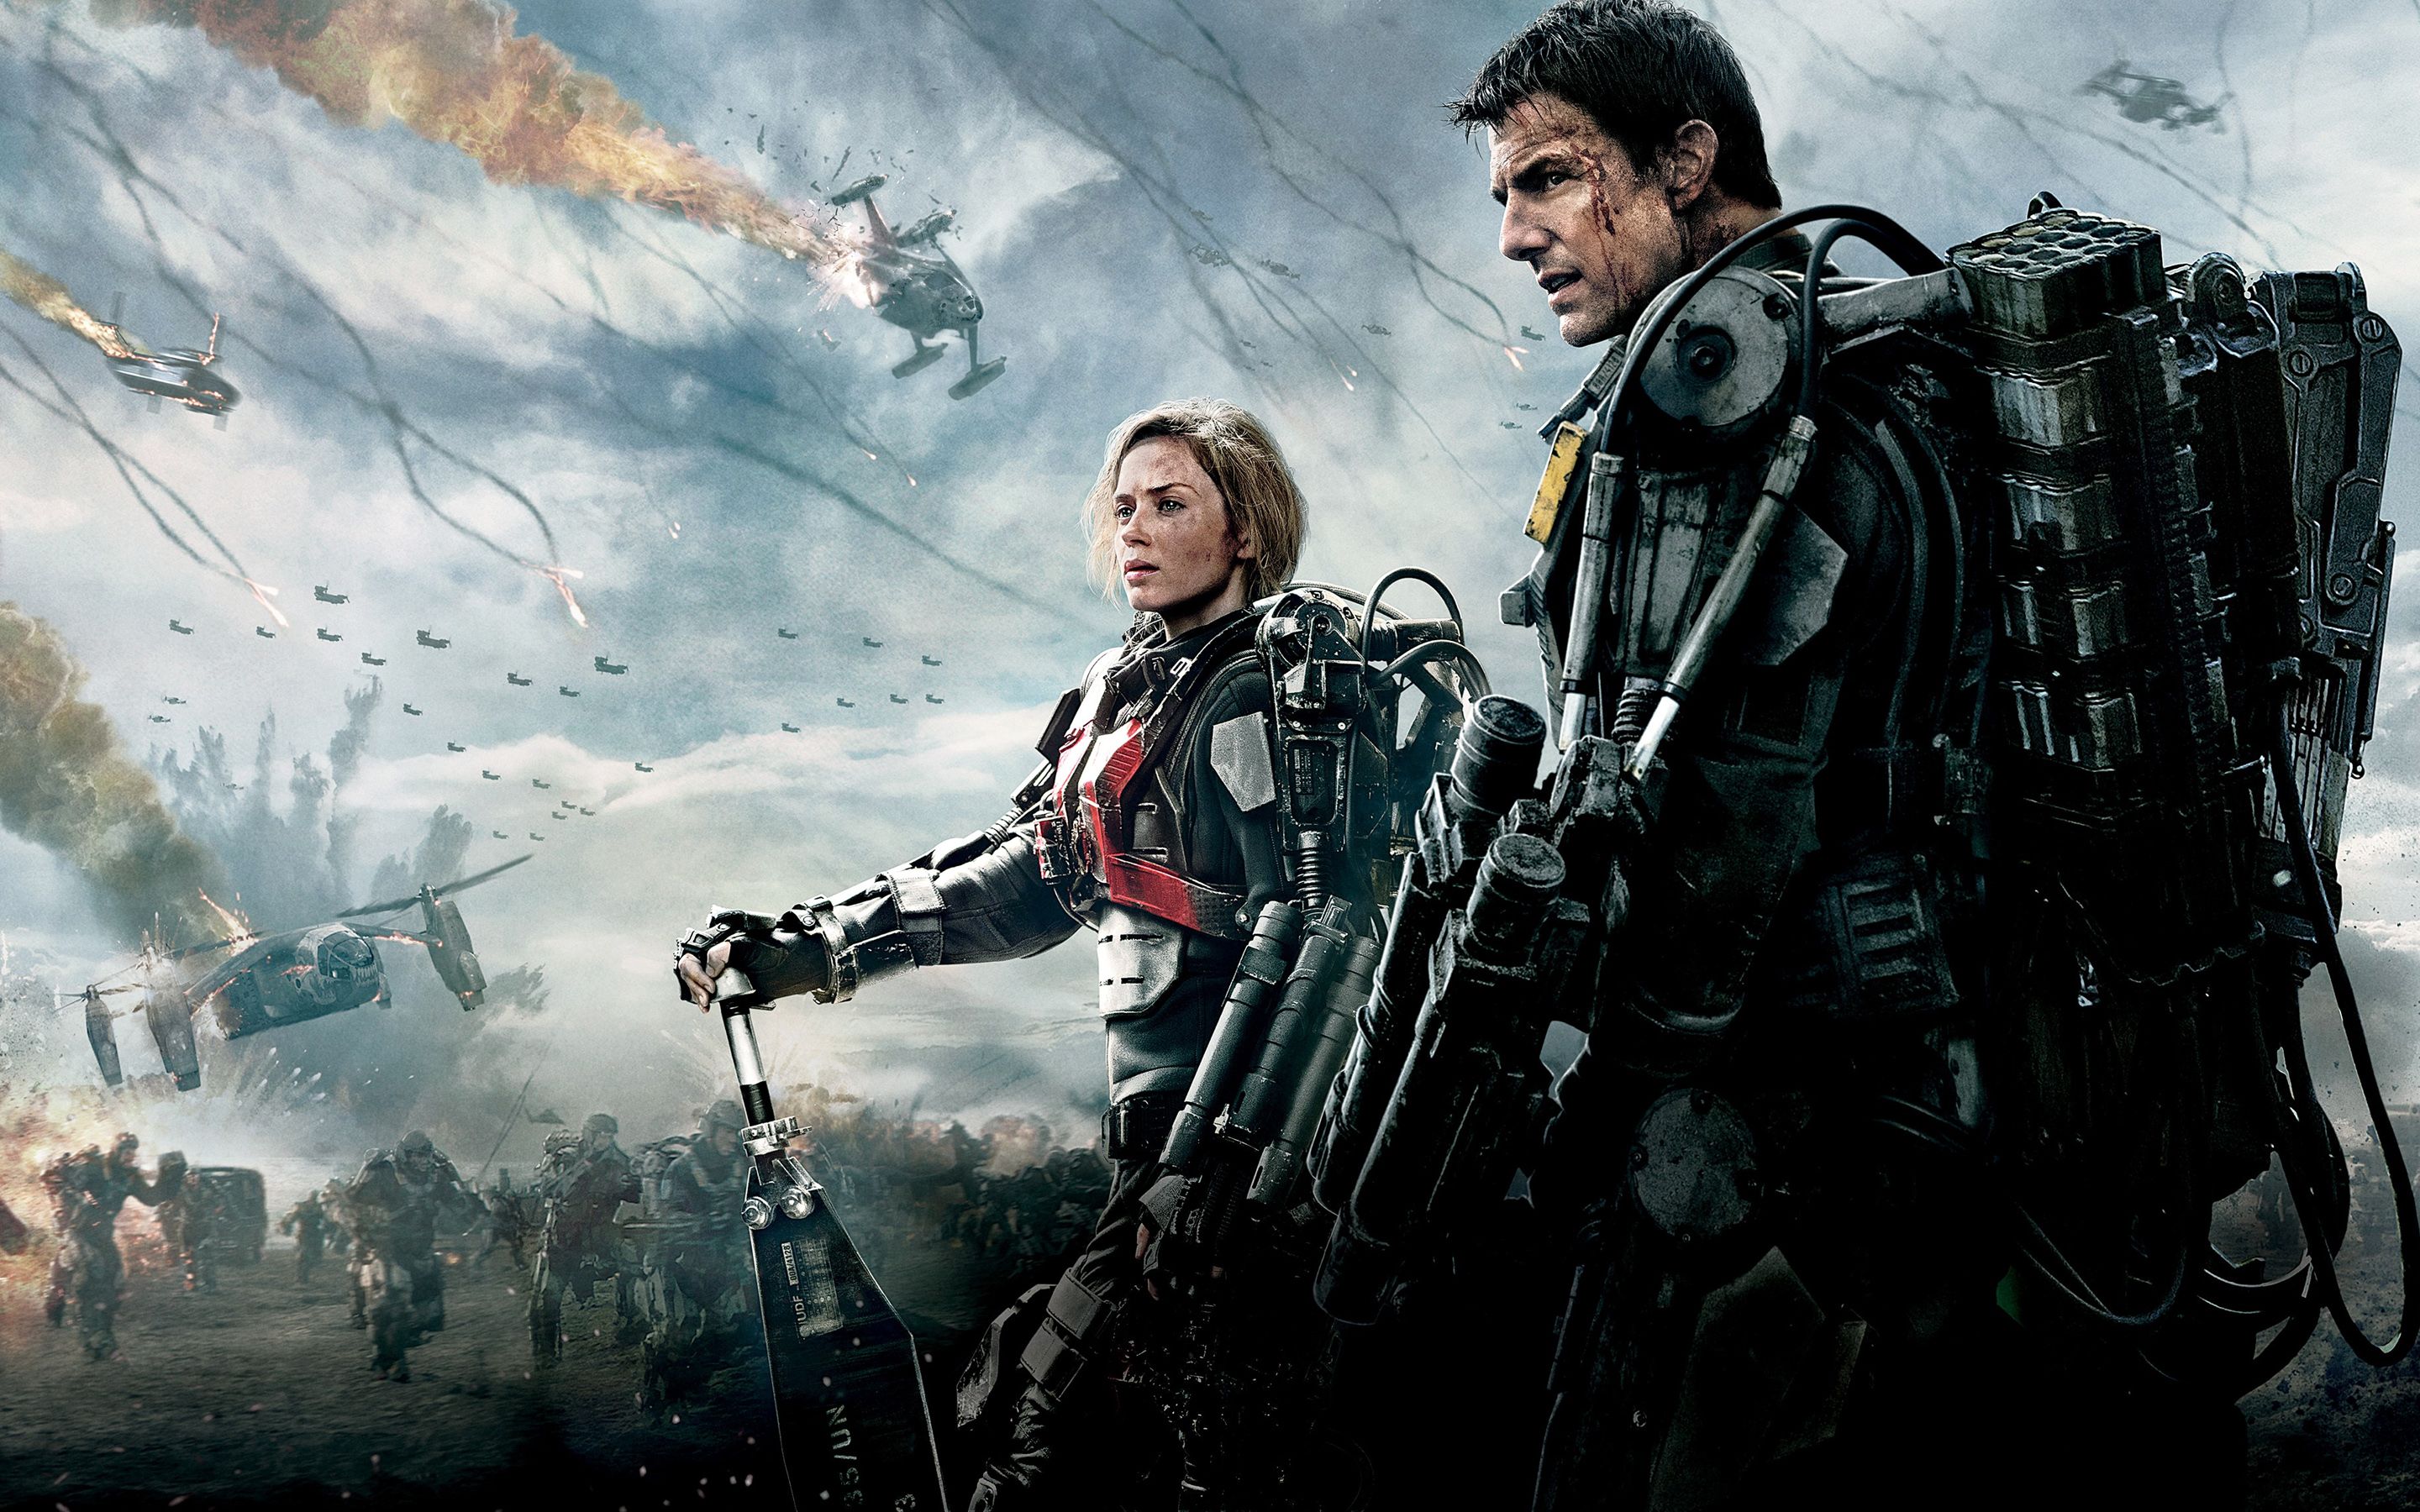 Wallpaper, futuristic, movies, science fiction, Emily Blunt, Edge of Tomorrow, Tom Cruise, screenshot, computer wallpaper, pc game, action film 2880x1800